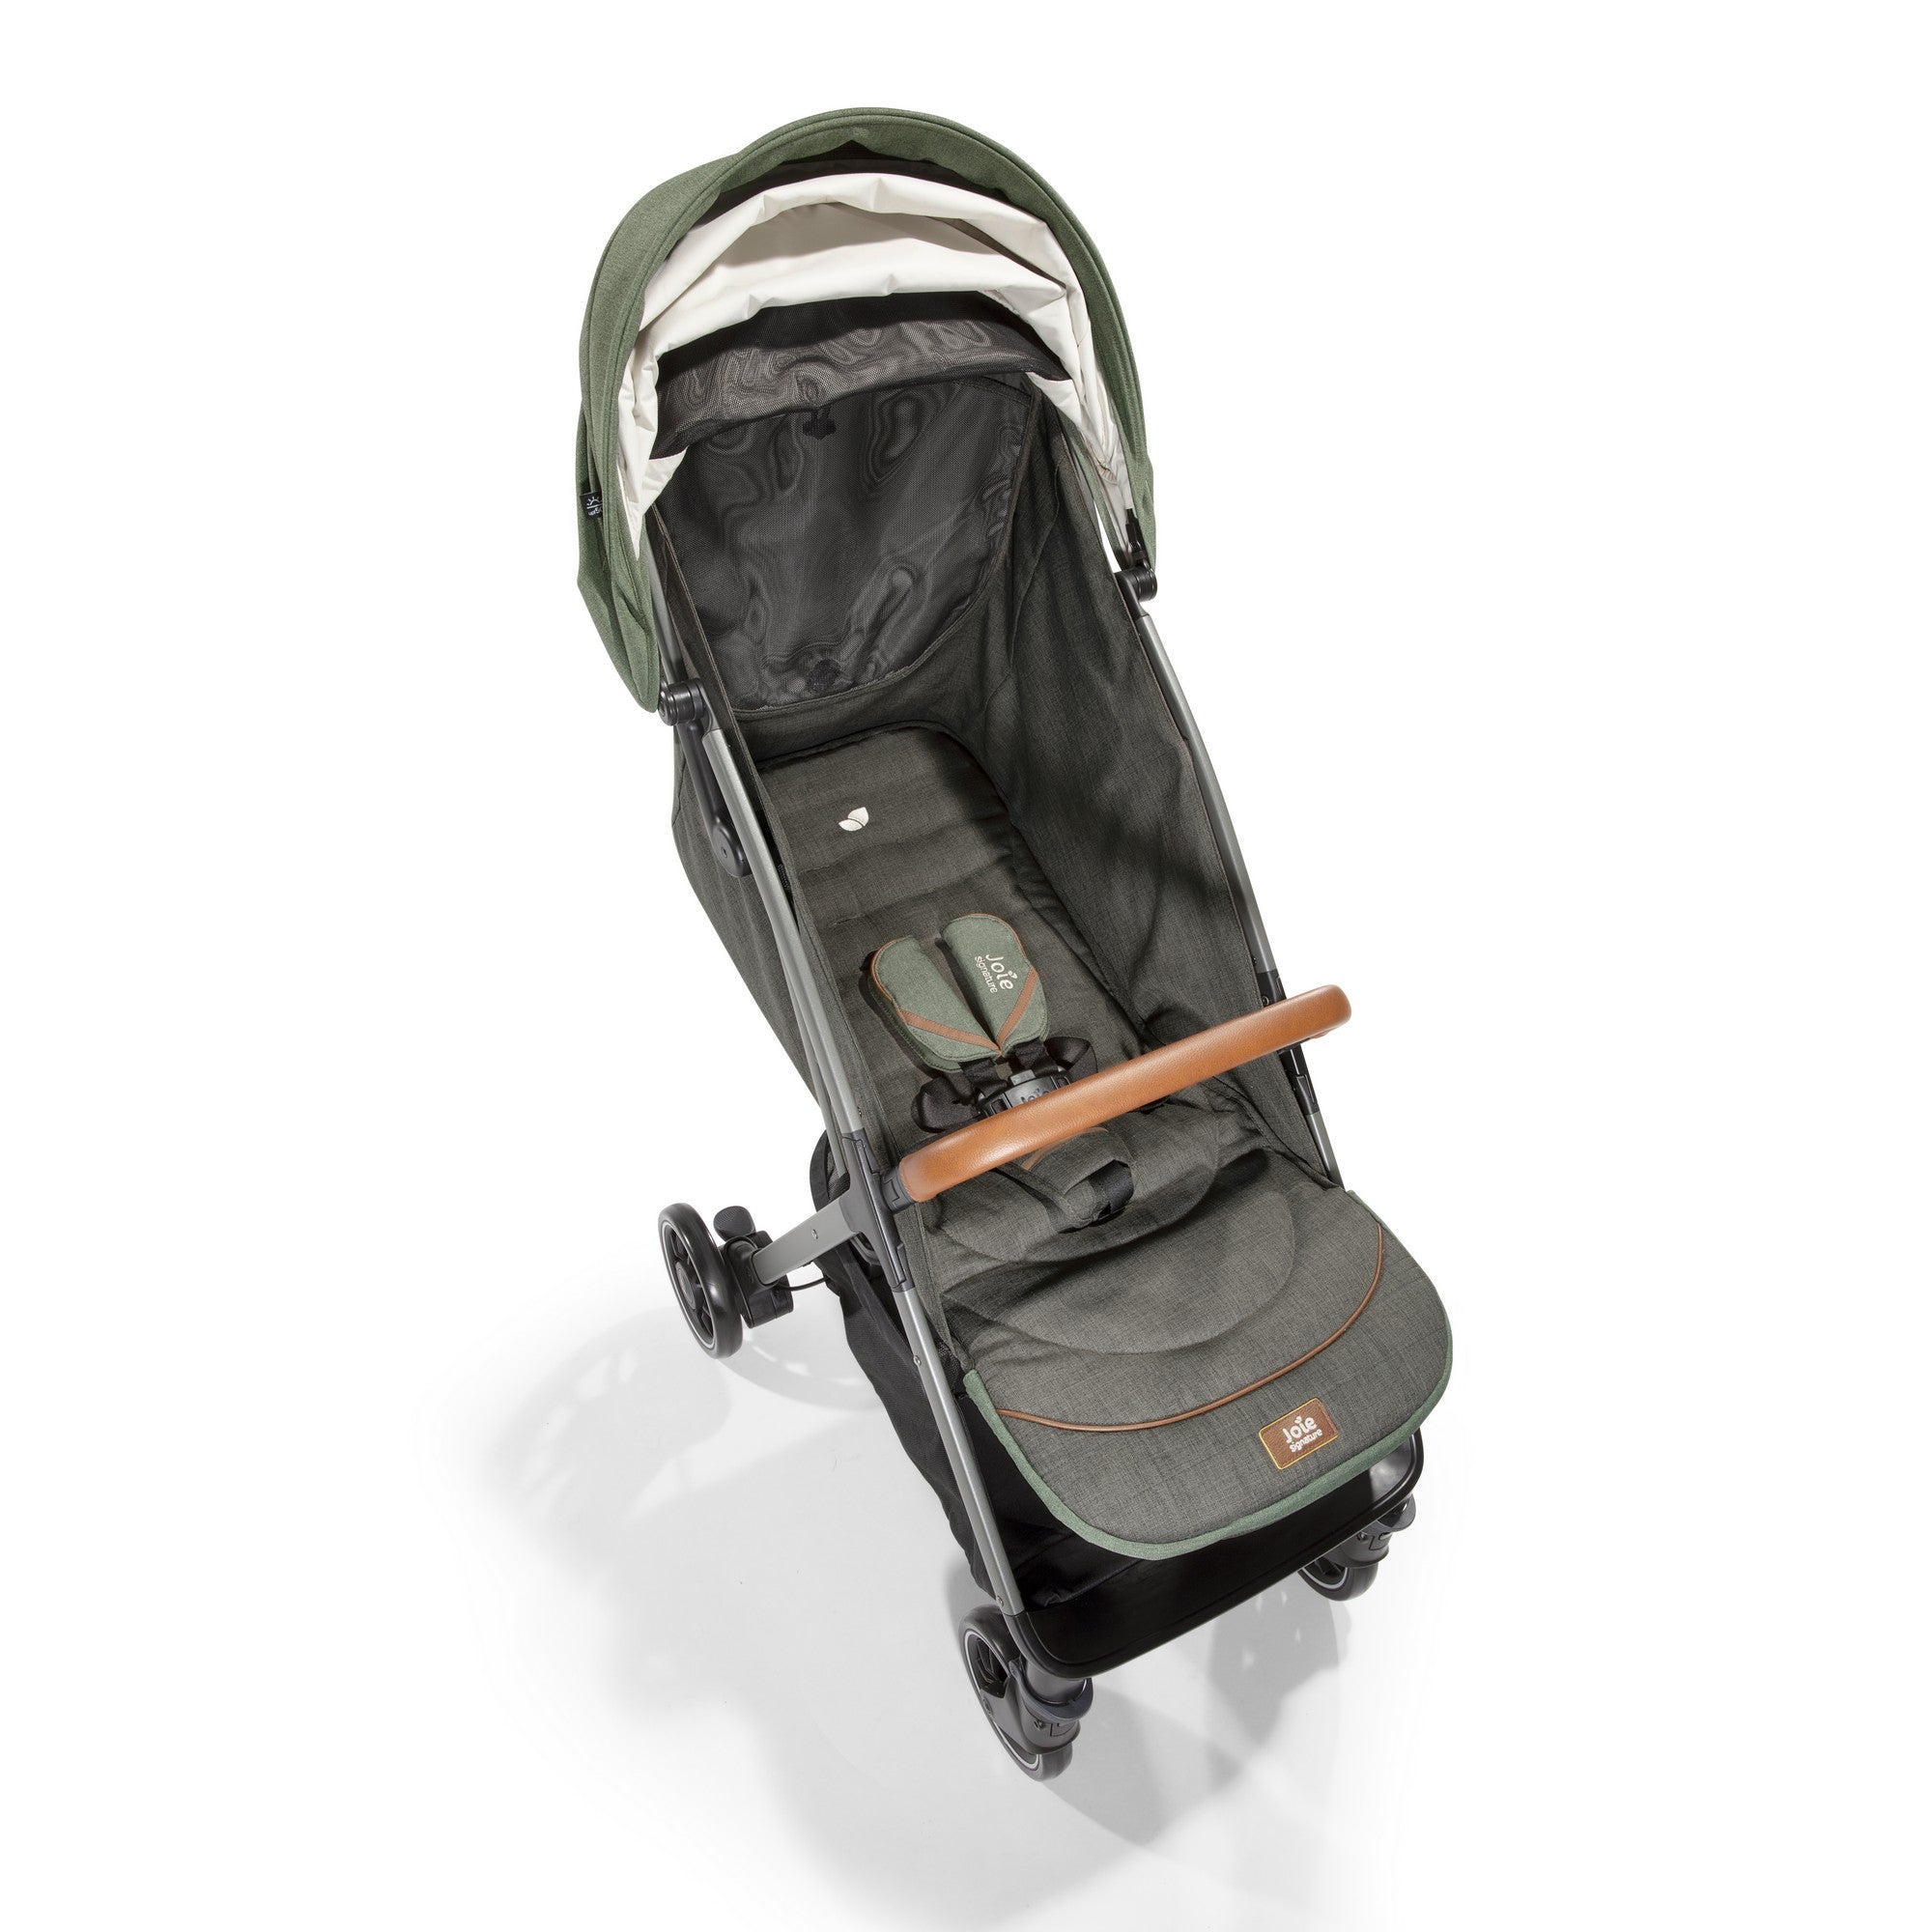 Joie Parcel 3in1 compact stroller - Pine